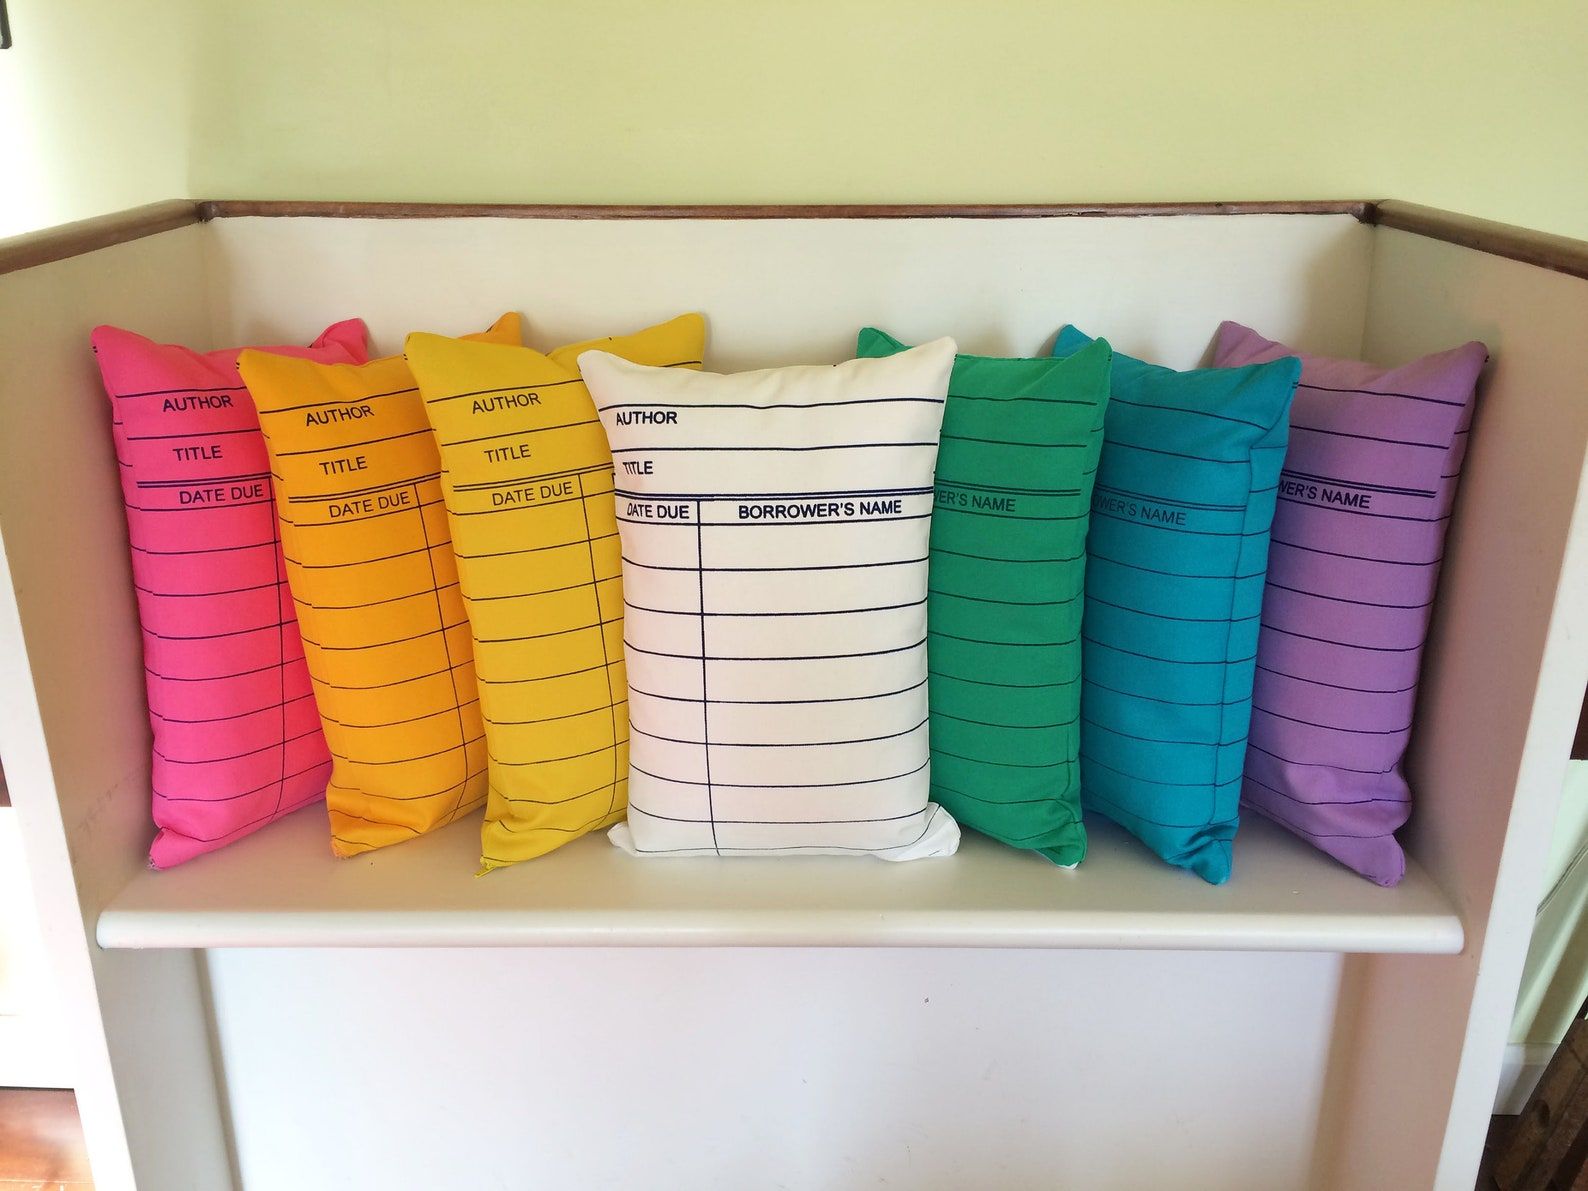 Image of seven colorful pillows, all in the shape of a library due date card. 